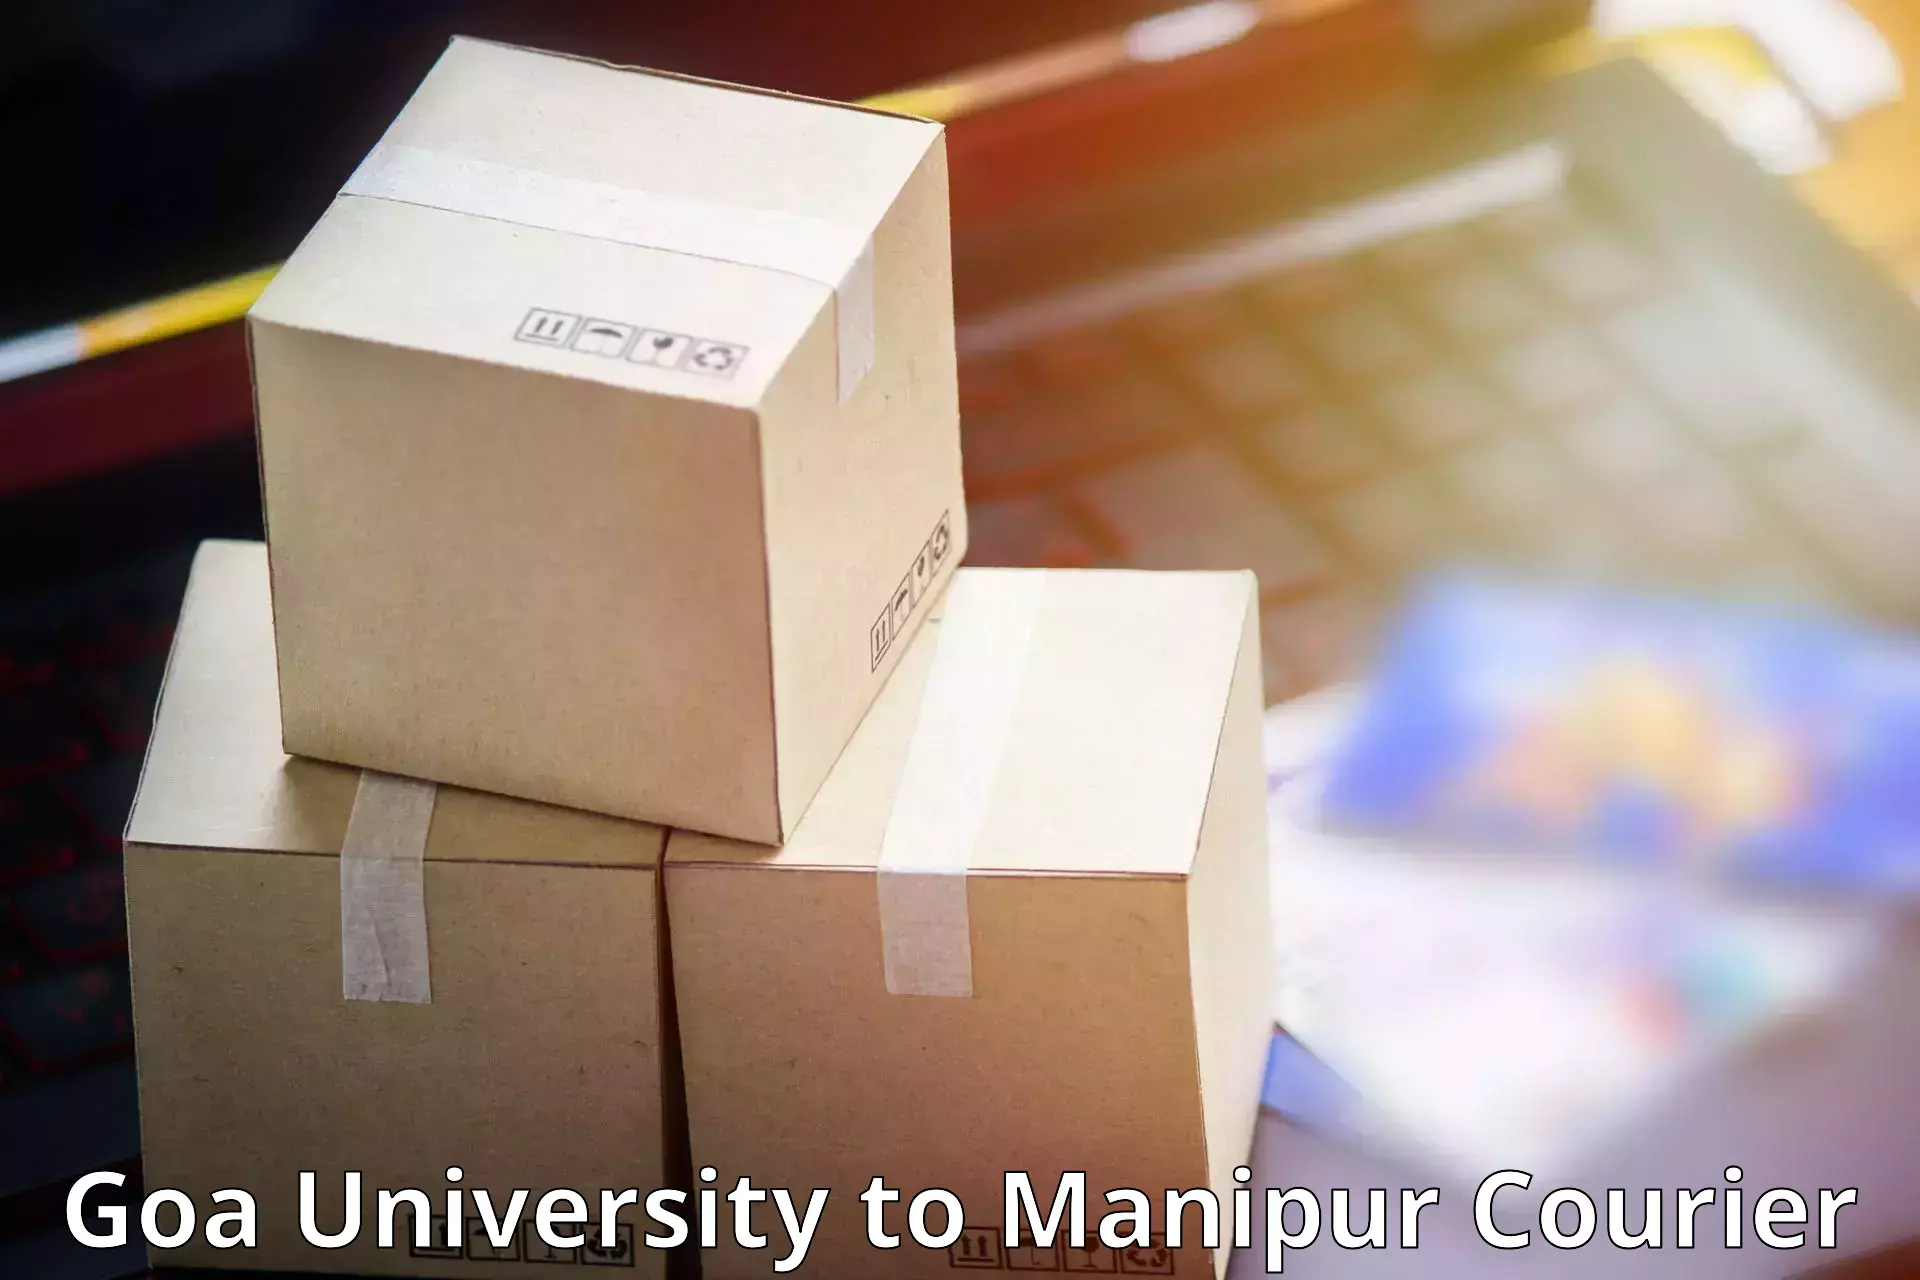 Cash on delivery service Goa University to Imphal